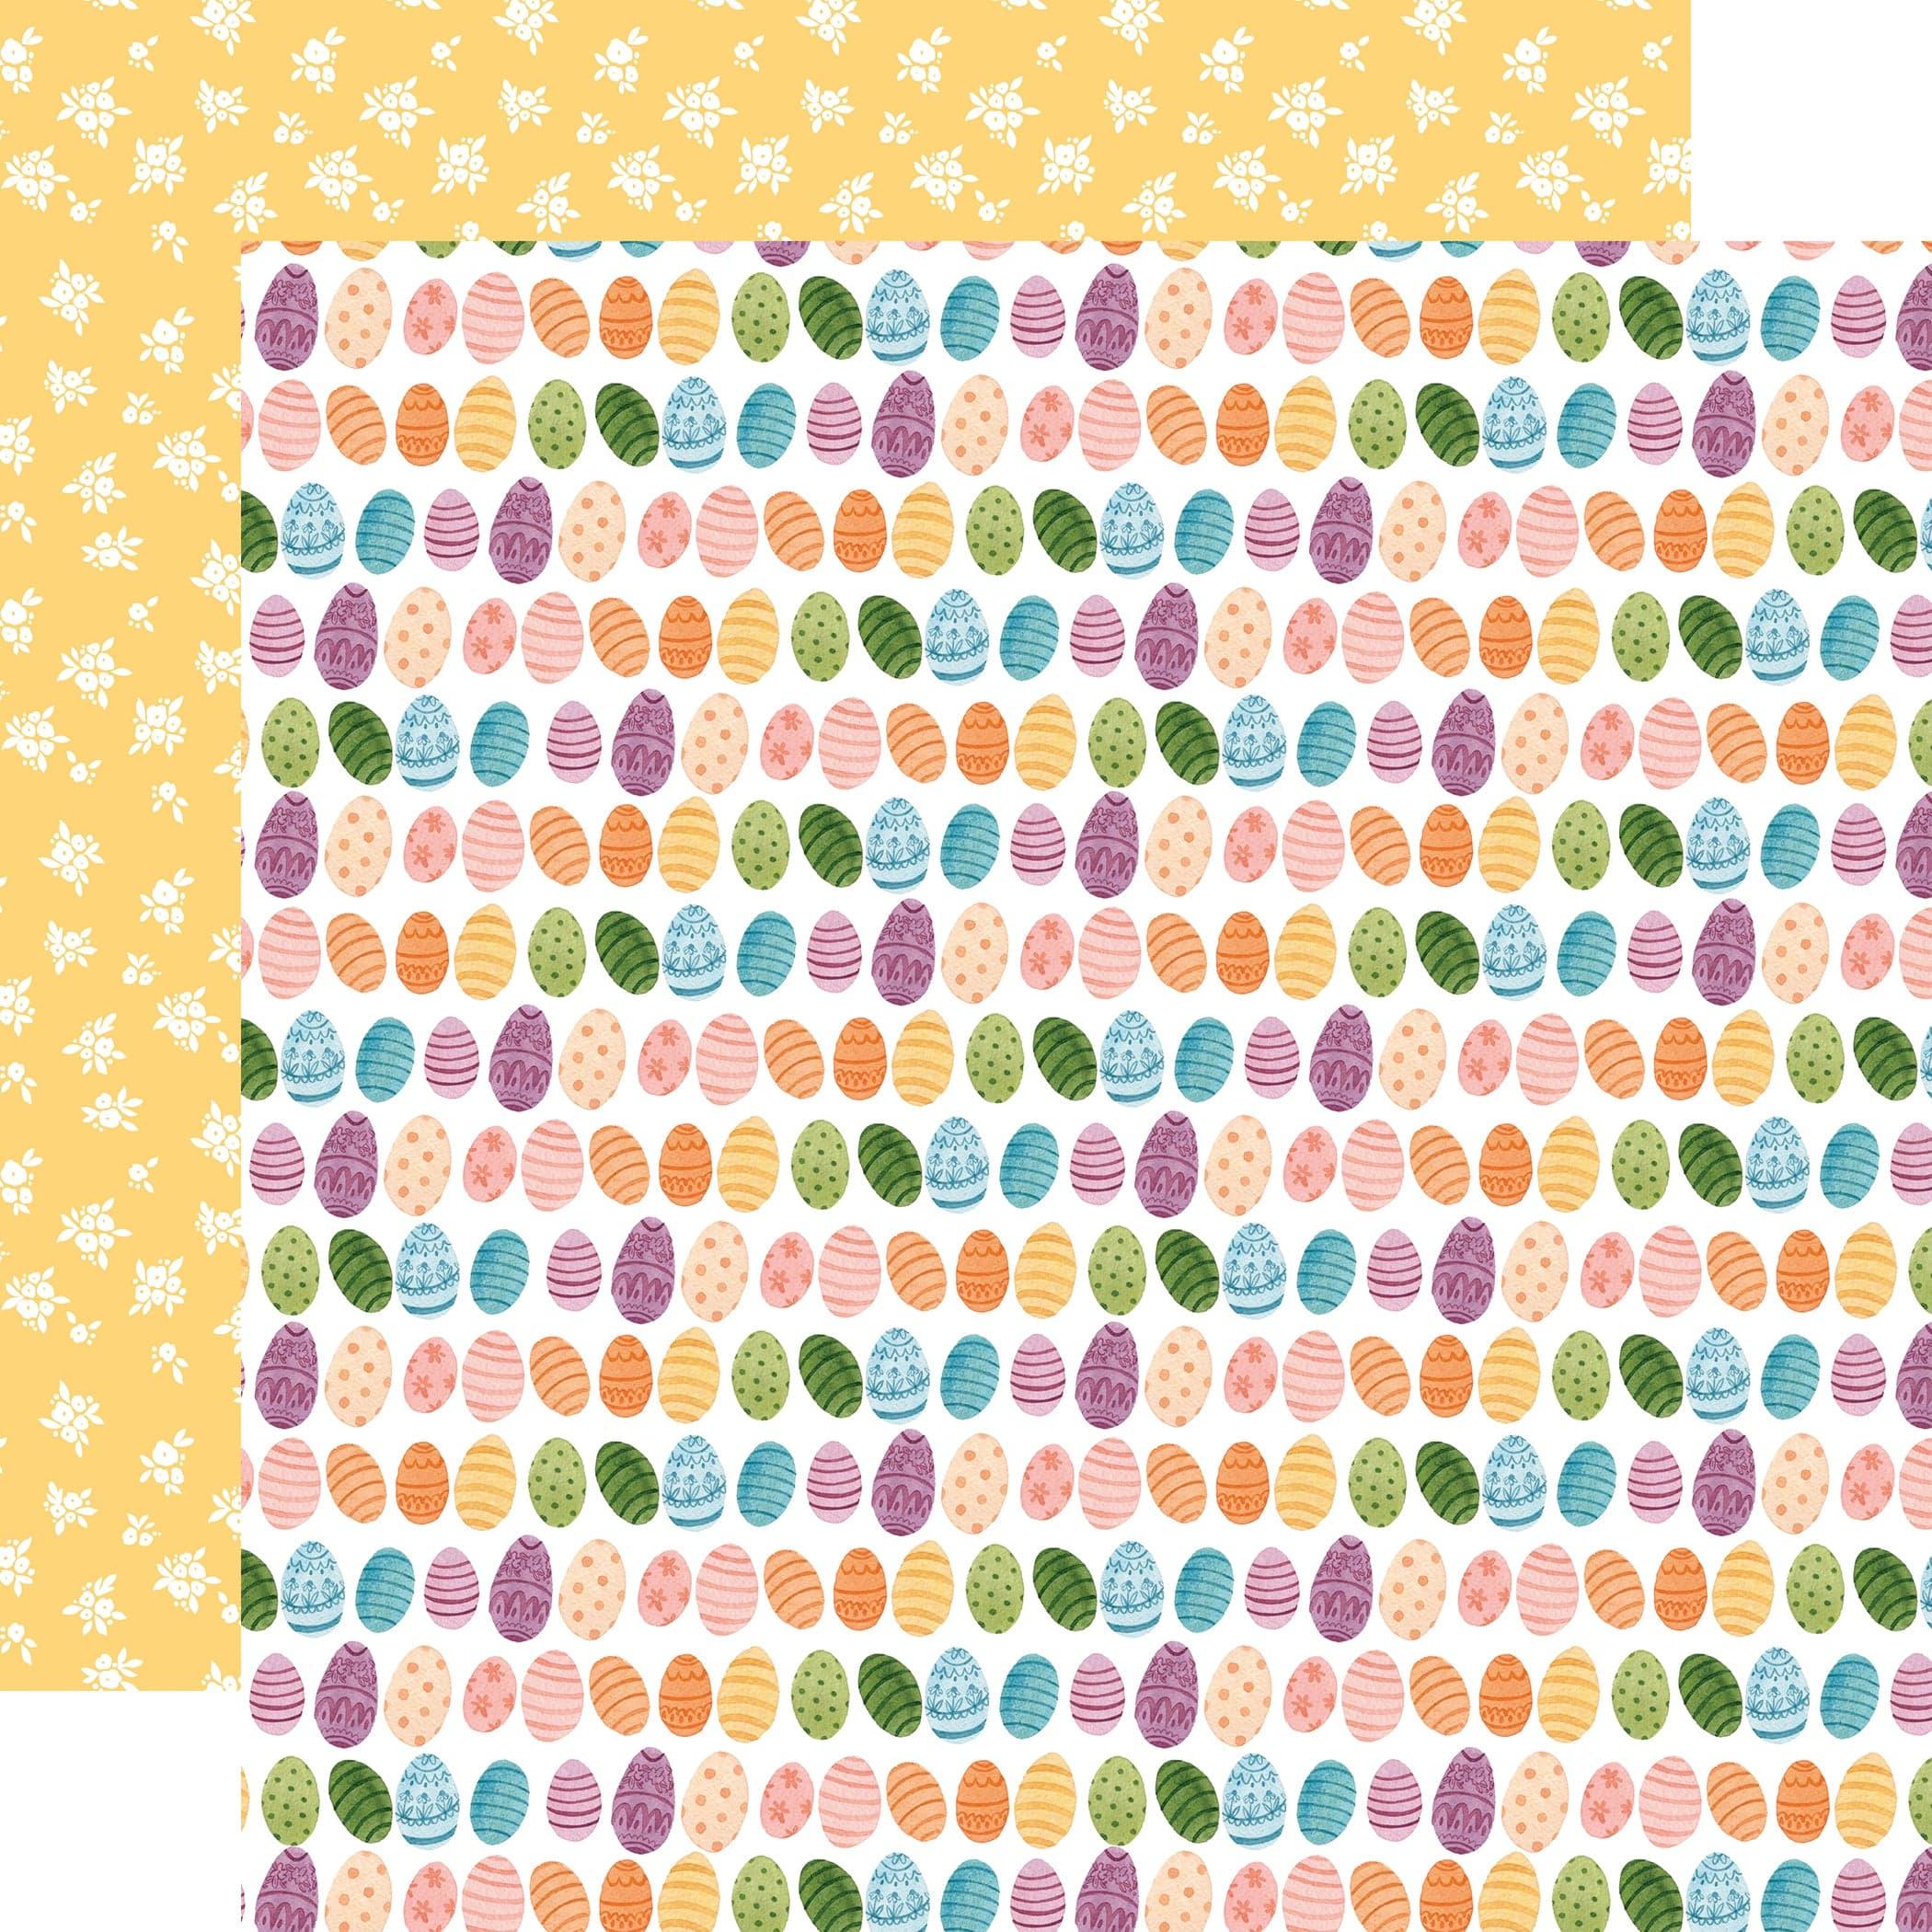 My Favorite Easter Collection Good Egg 12 x 12 Double-Sided Scrapbook Paper by Echo Park Paper - Scrapbook Supply Companies